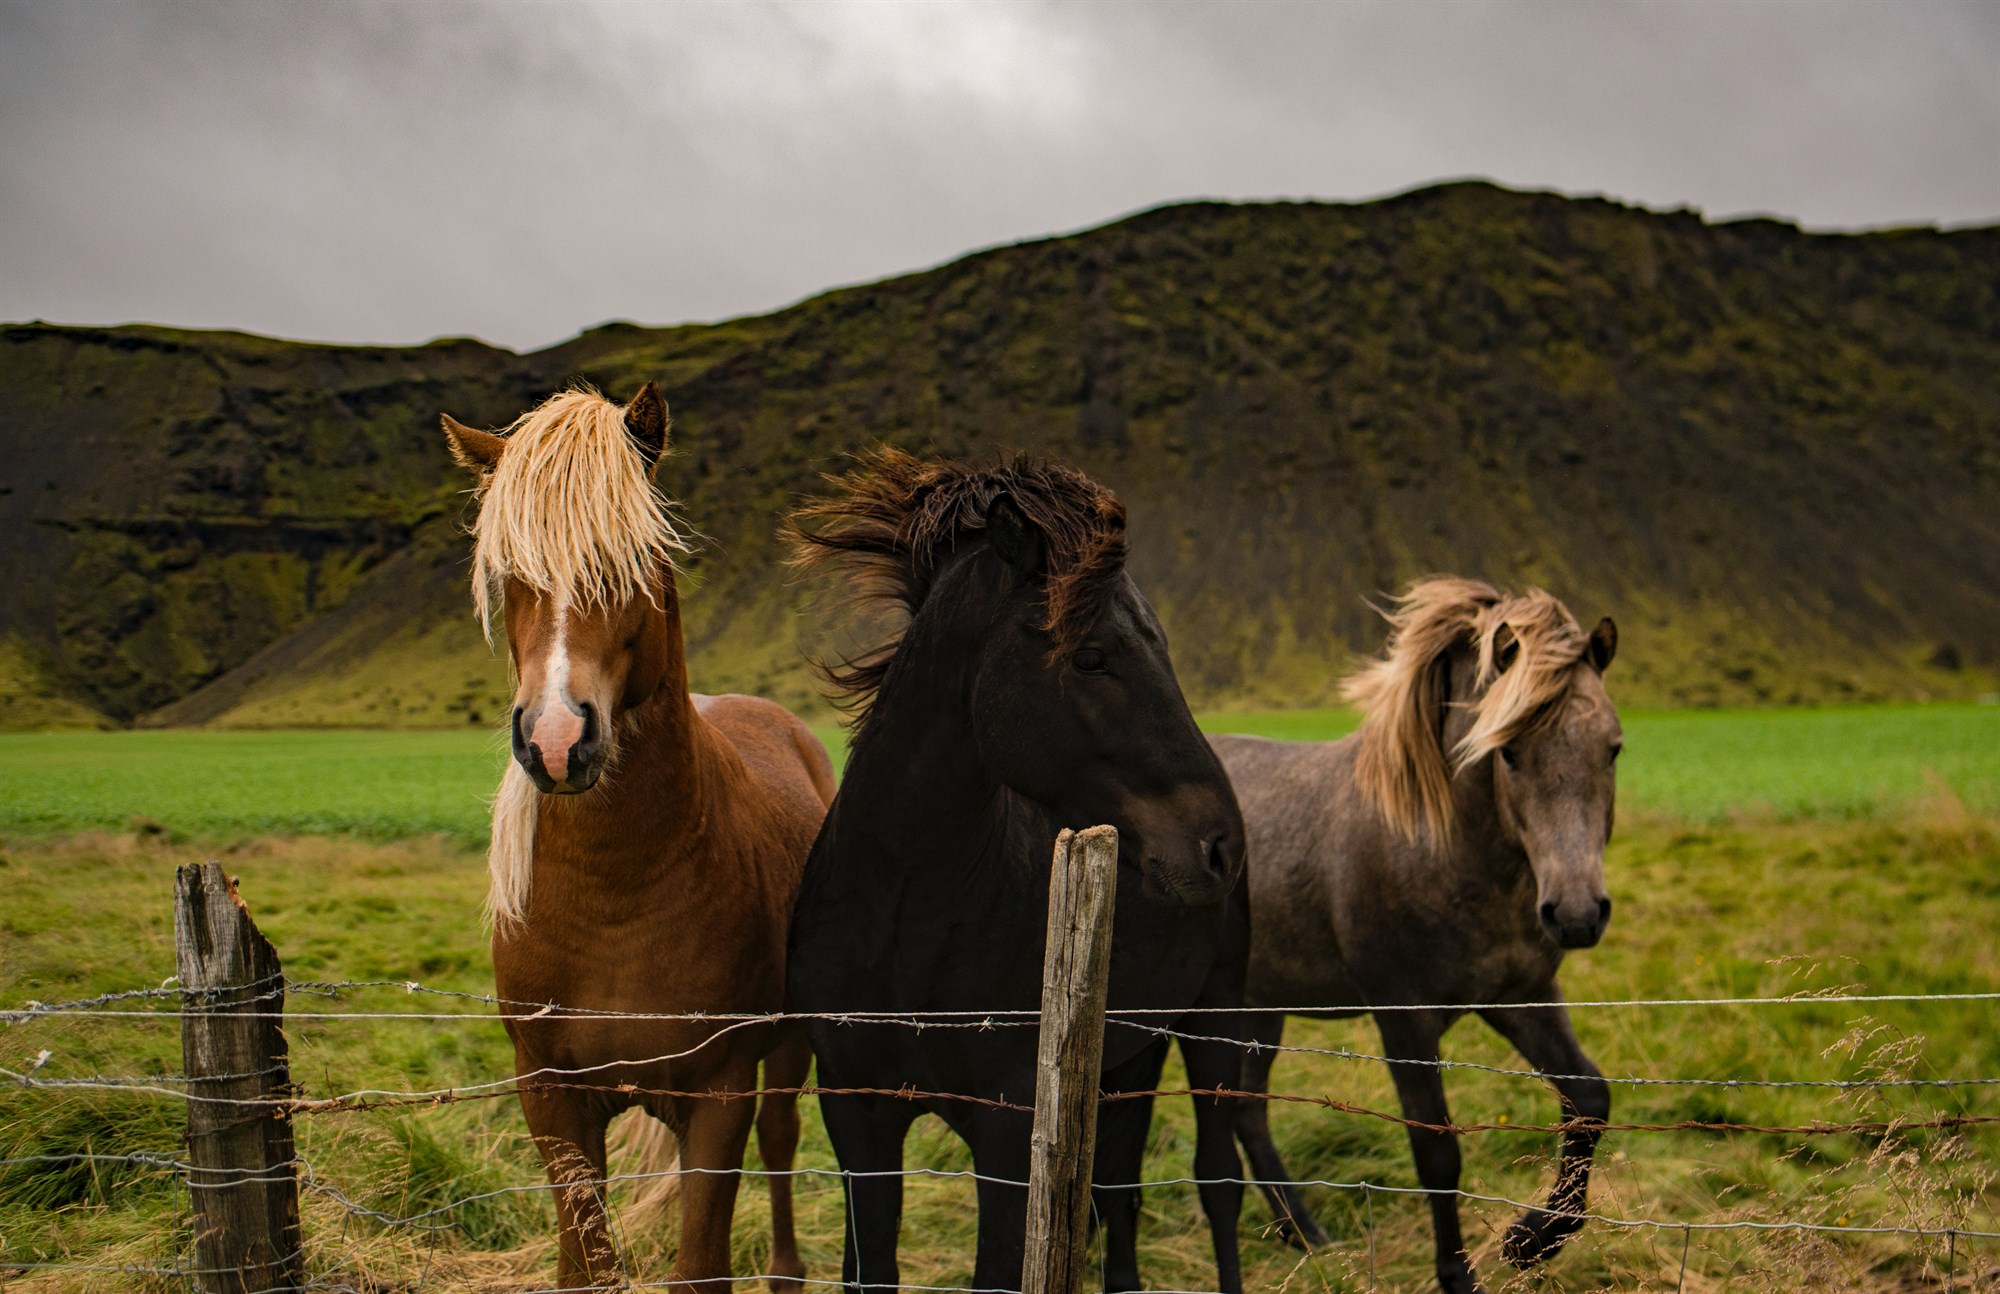 Icelandic Horses stood in a grassy plain behind a wire fence.